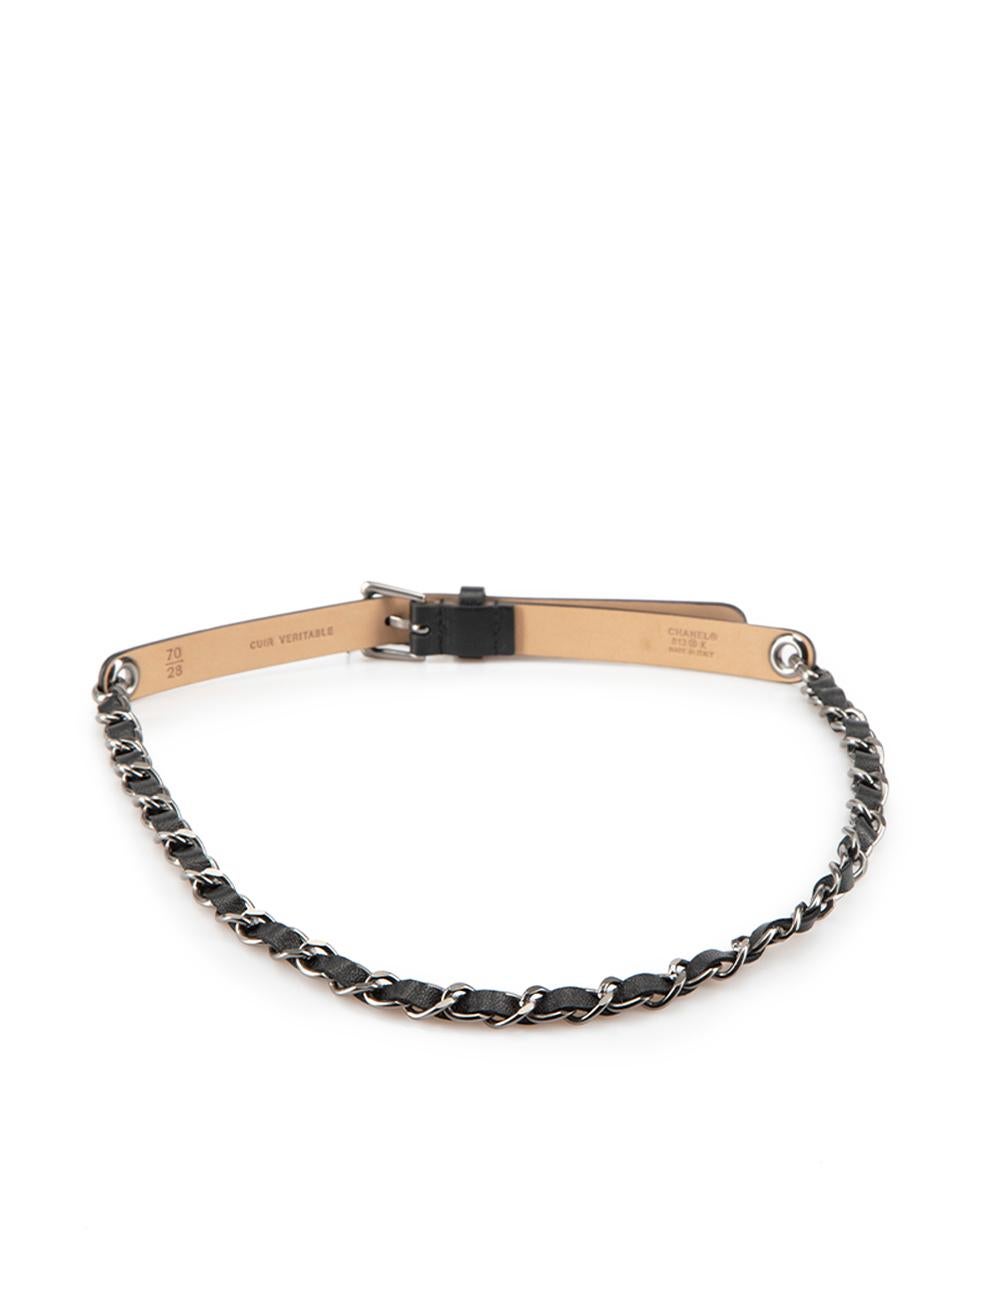 Chanel Black Leather Skinny Chain Belt In New Condition For Sale In London, GB